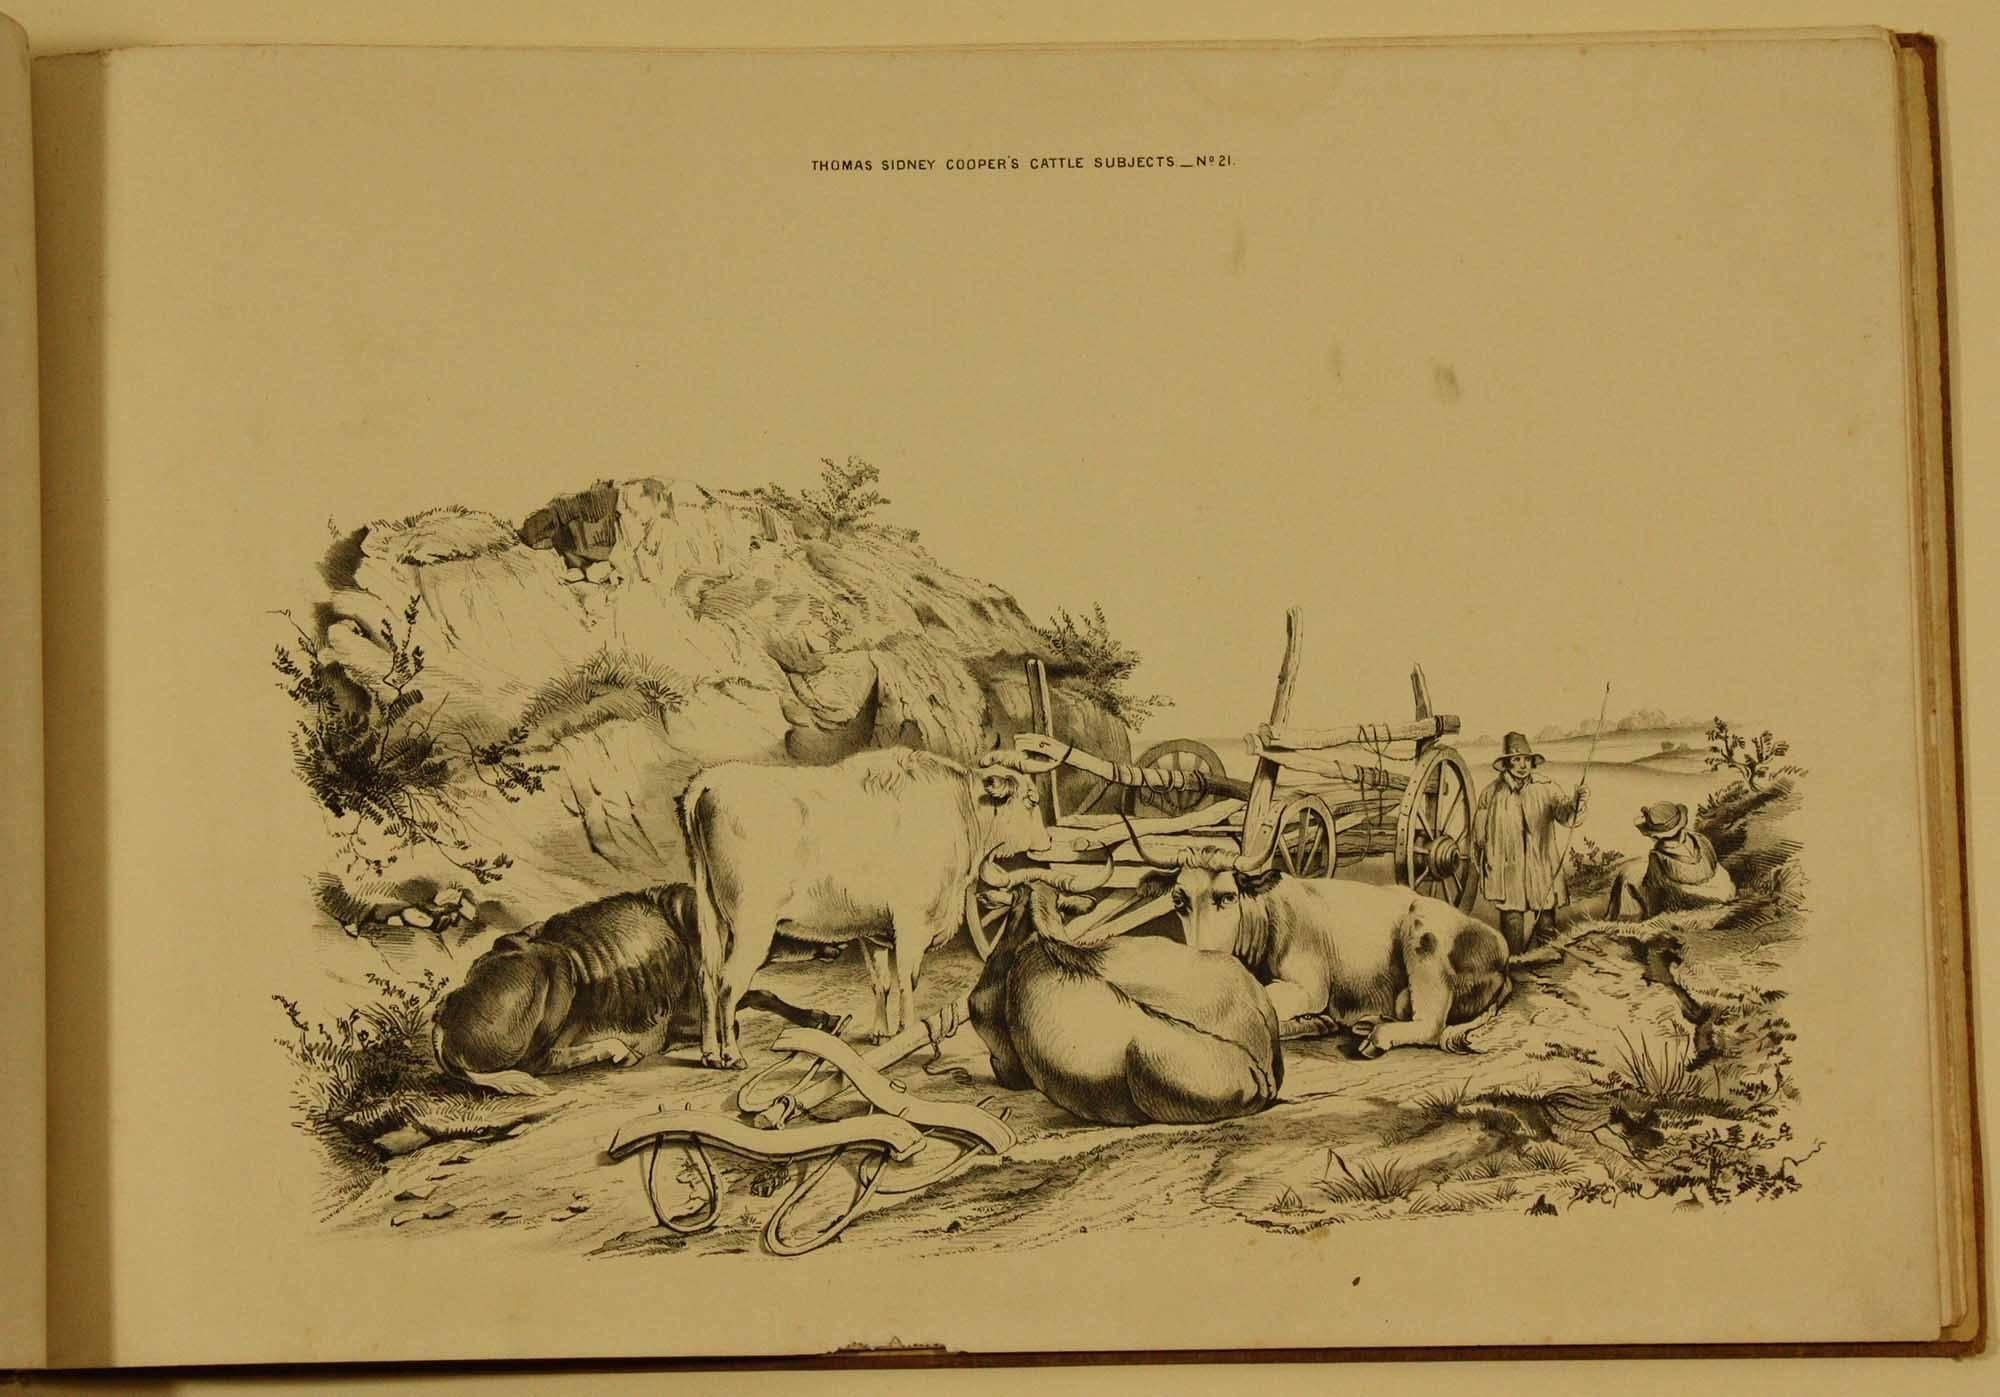 COOPER, Thomas Sidney  Groups of Cattle, Drawn from Nature Book 1839 London - Naturalistic Print by Thomas Sidney Cooper